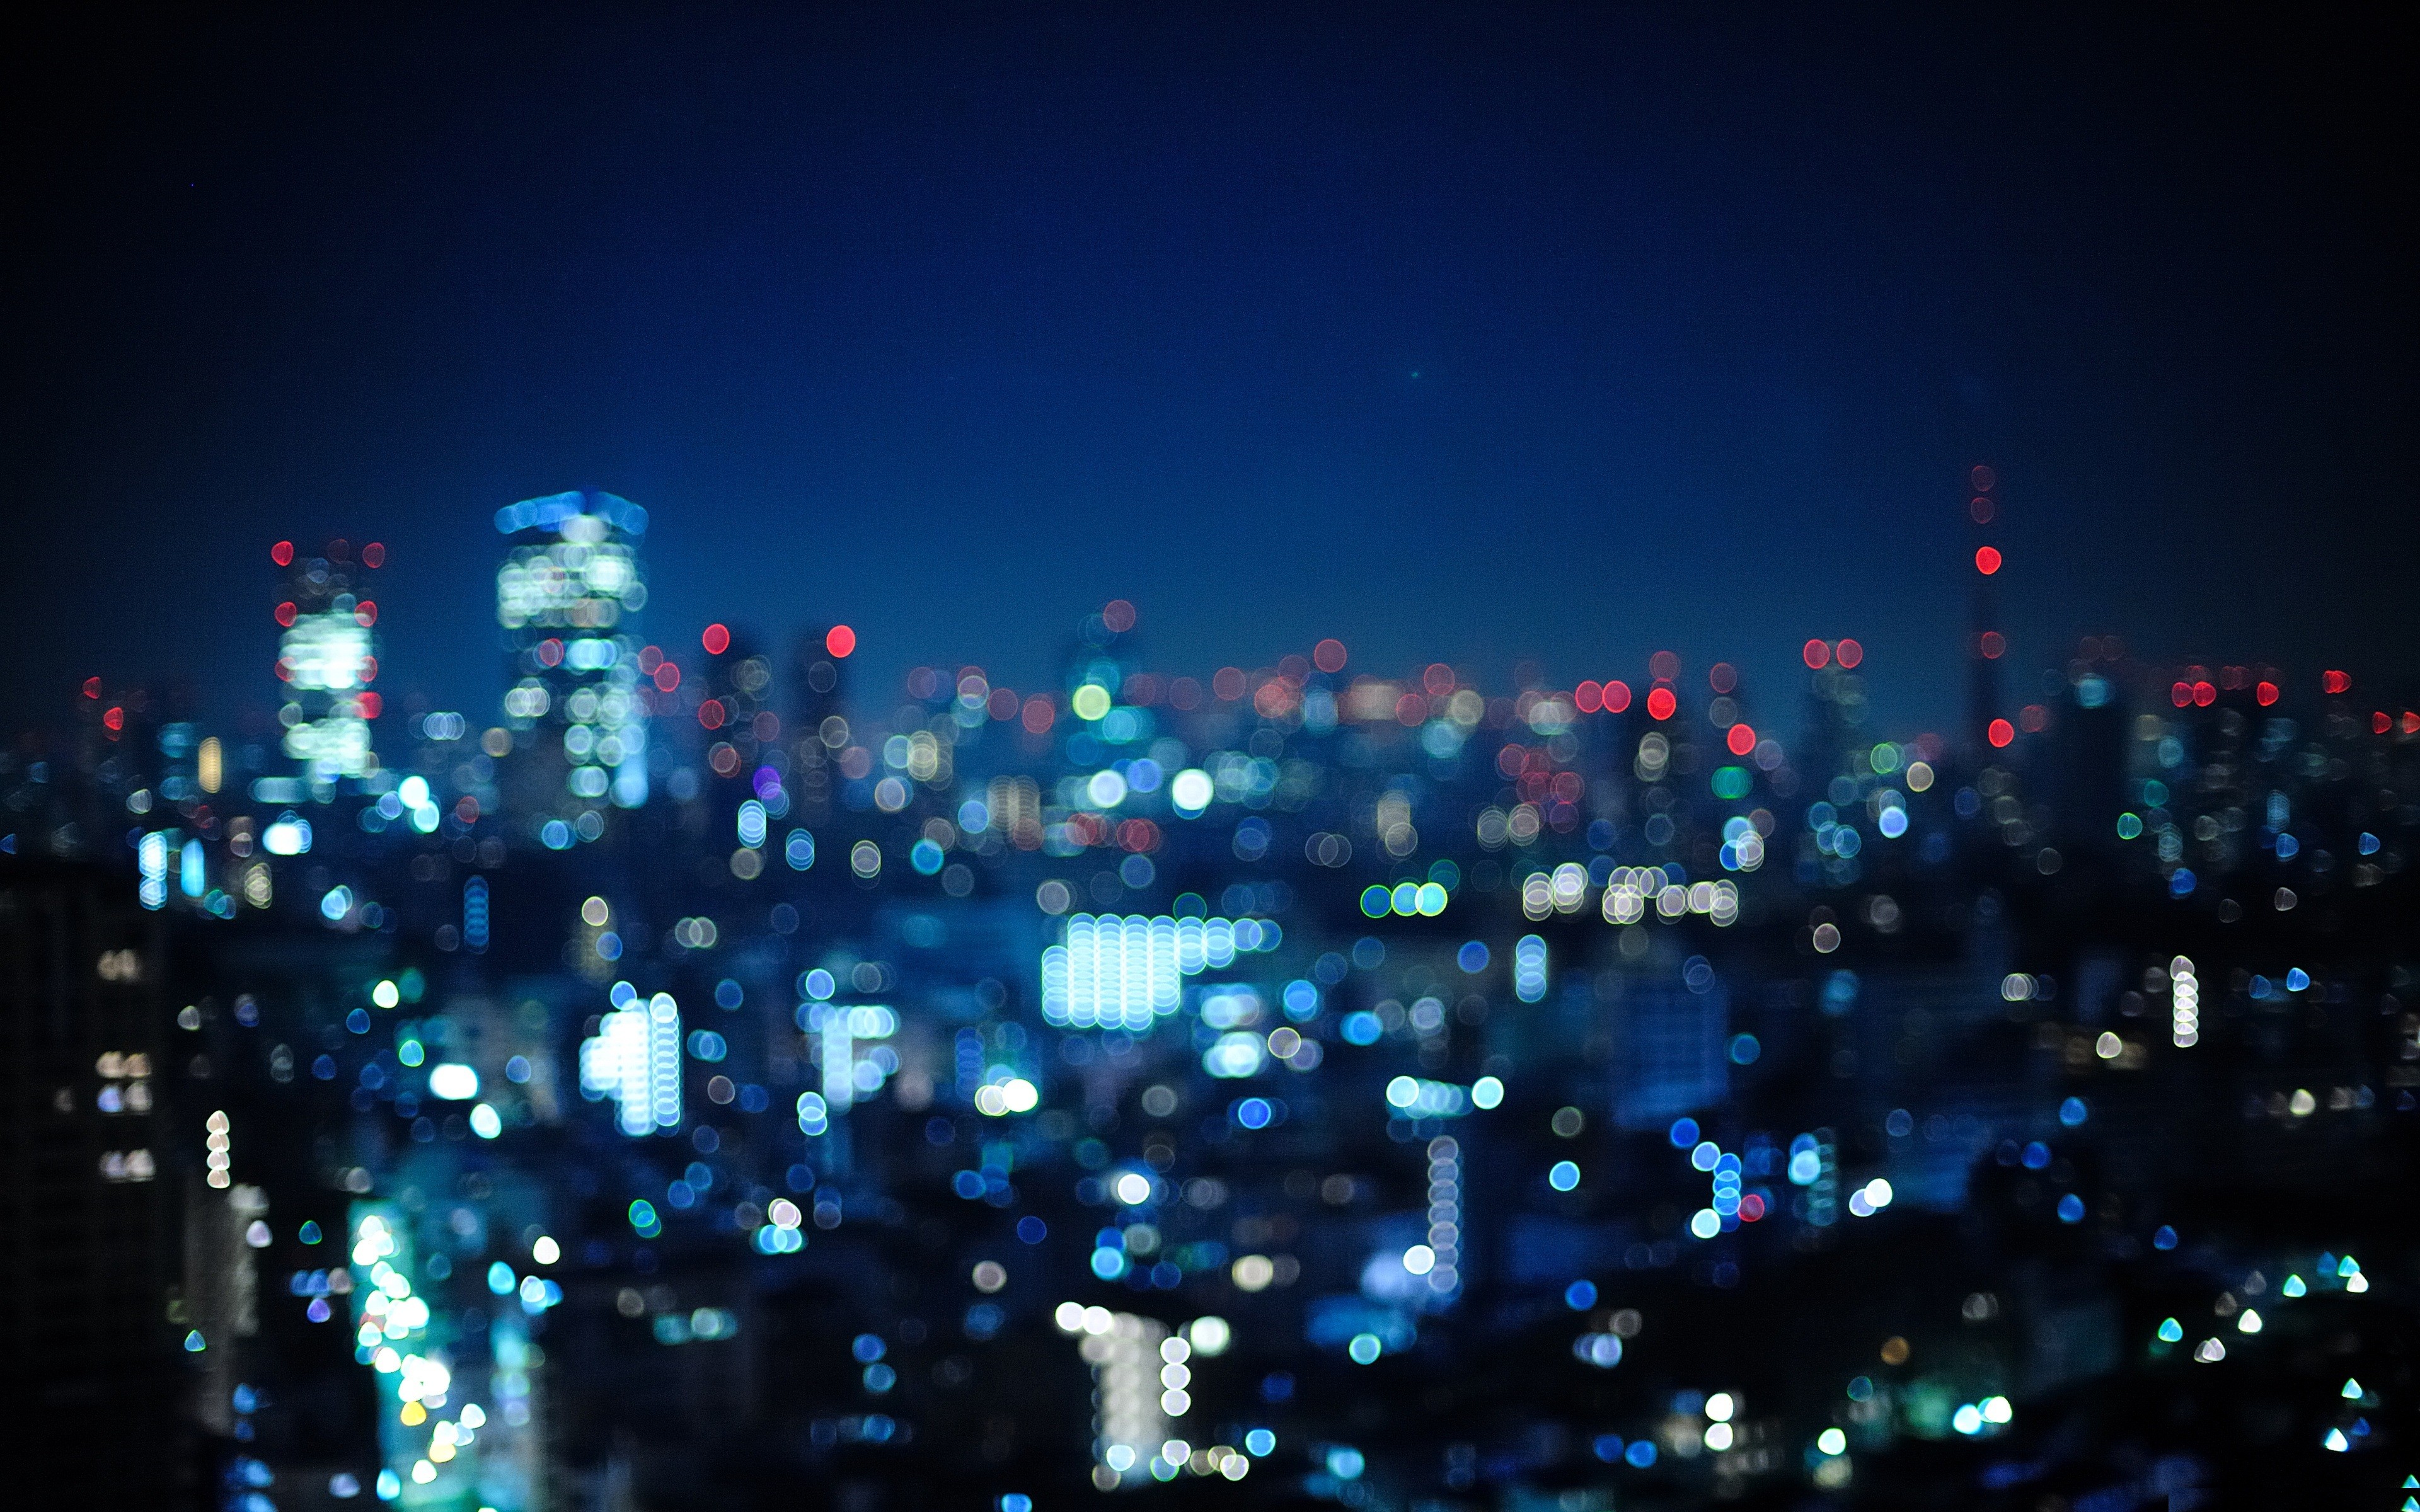 japan-bokeh-cities-cityscapes-out-1715017-3840x2400.jpg